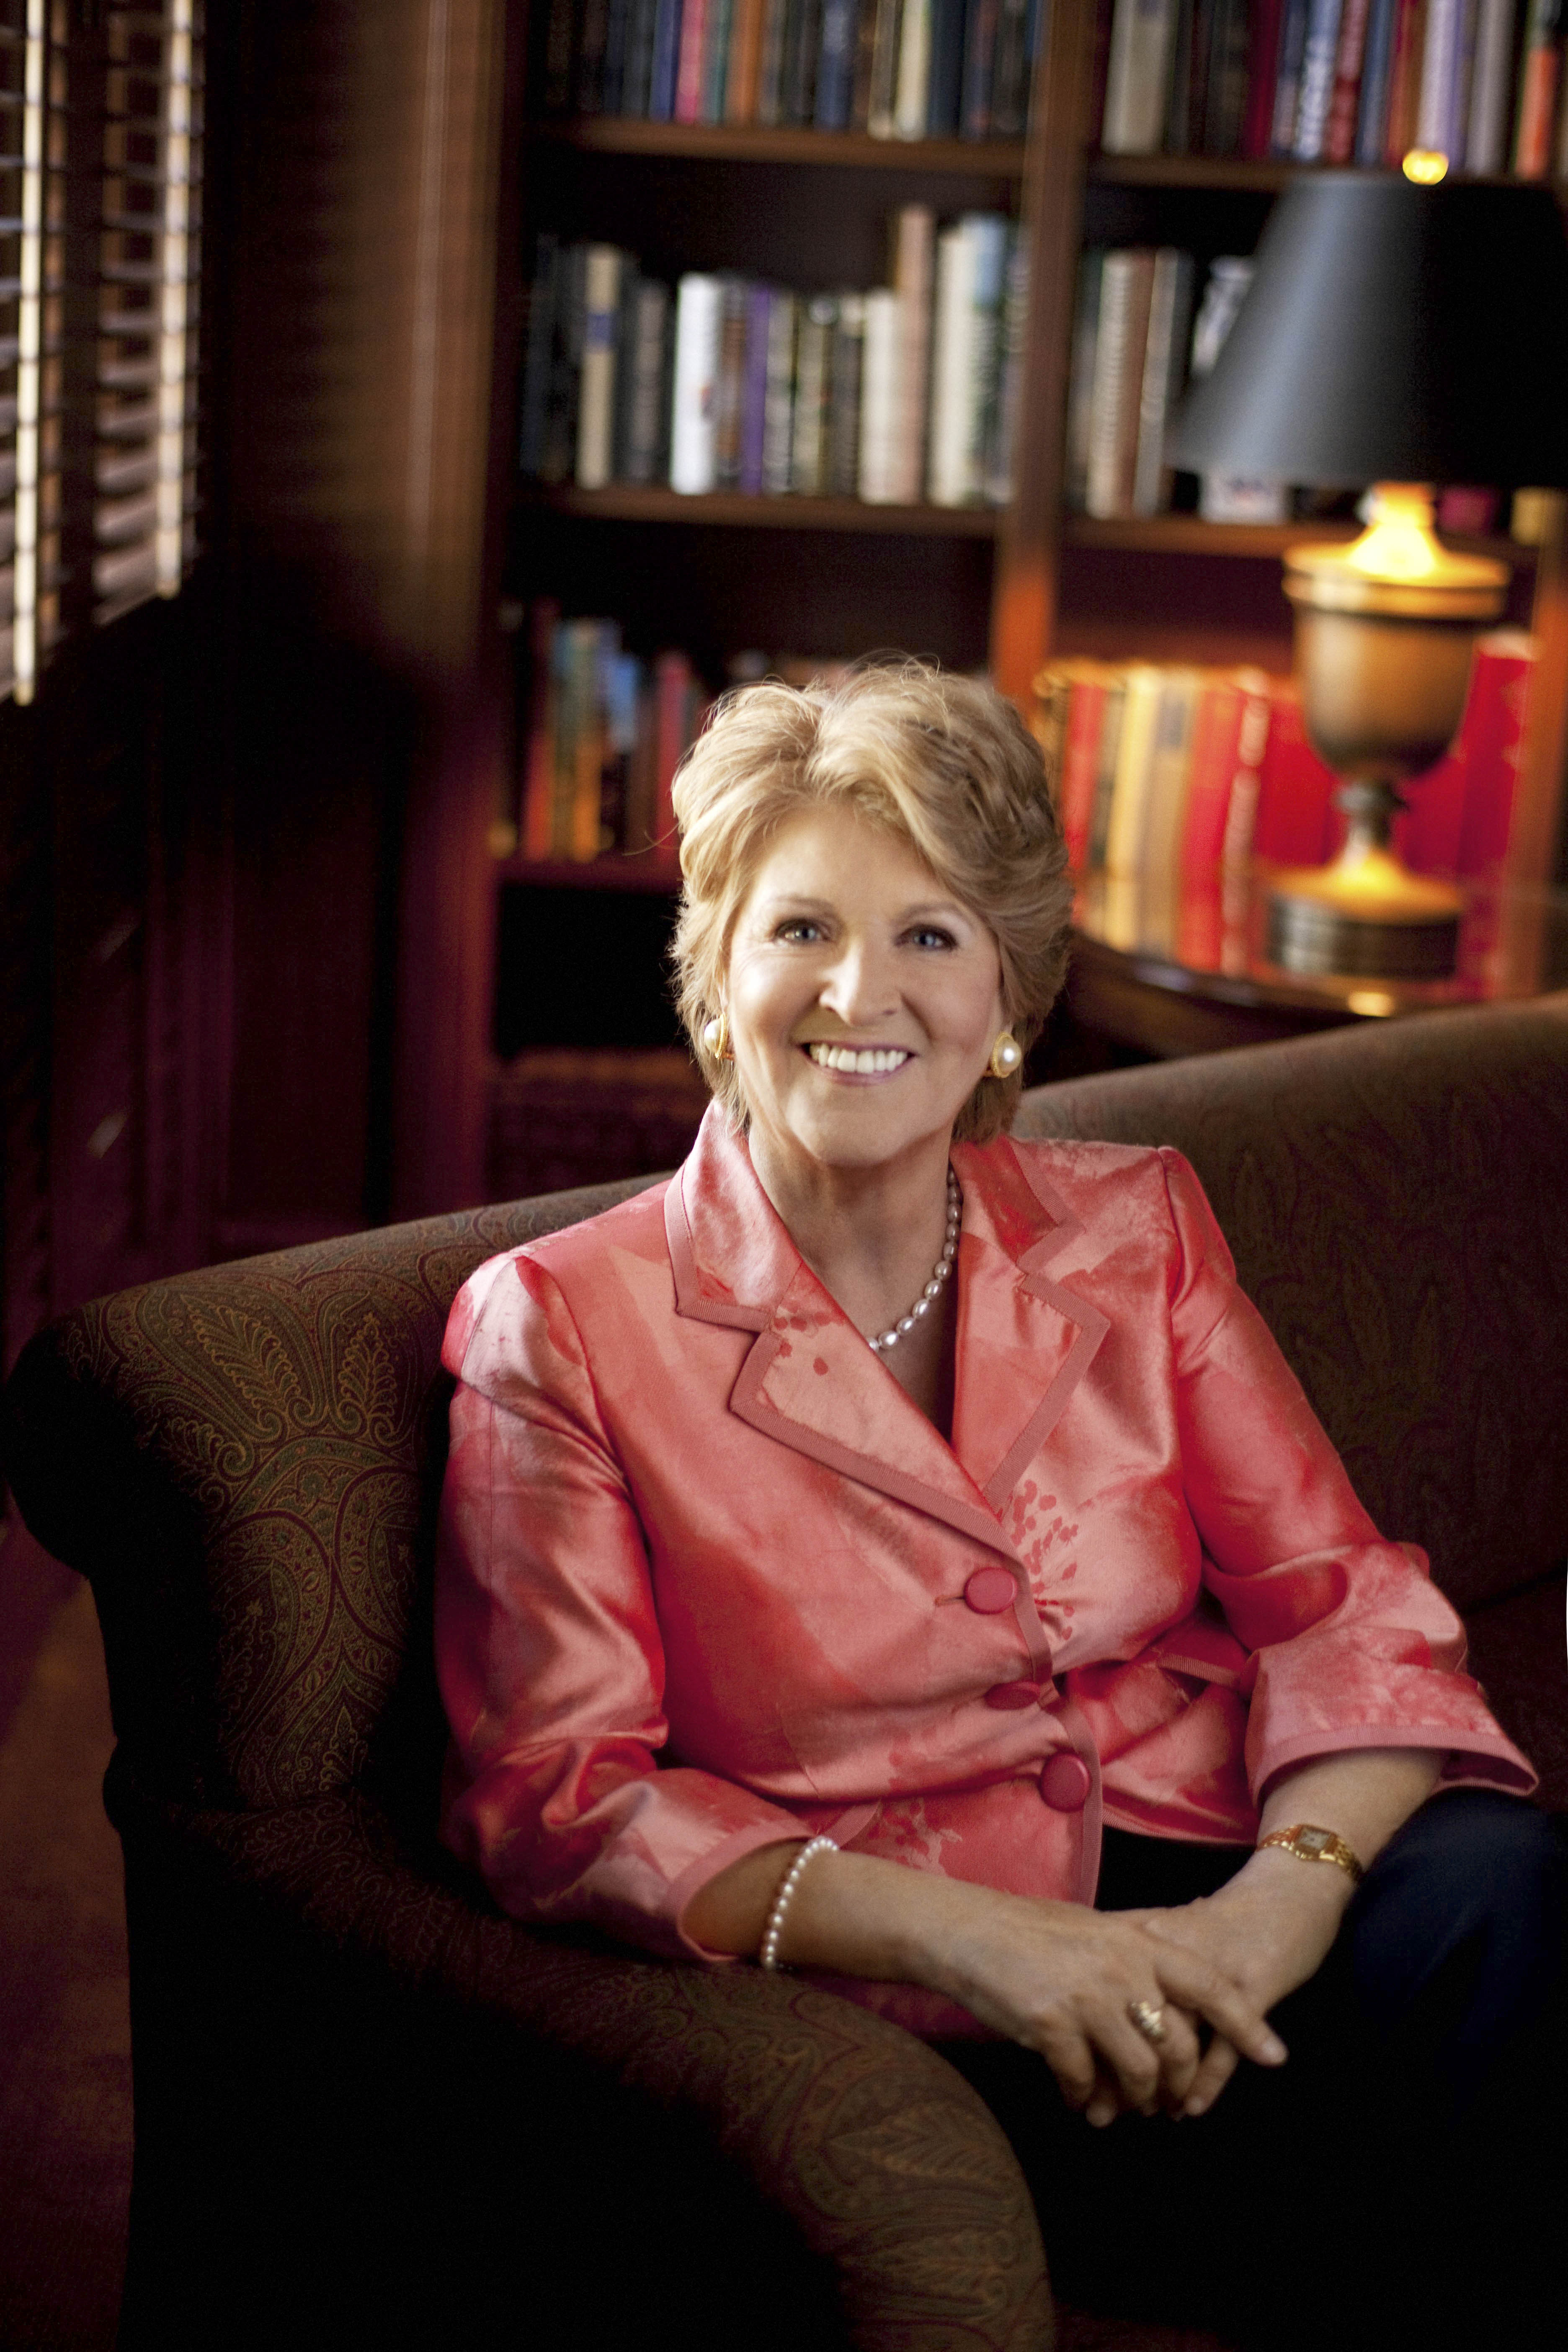 Author and SBWC Speaker Fannie Flagg "The Whole Town's Talking" (c) Andrew Southam